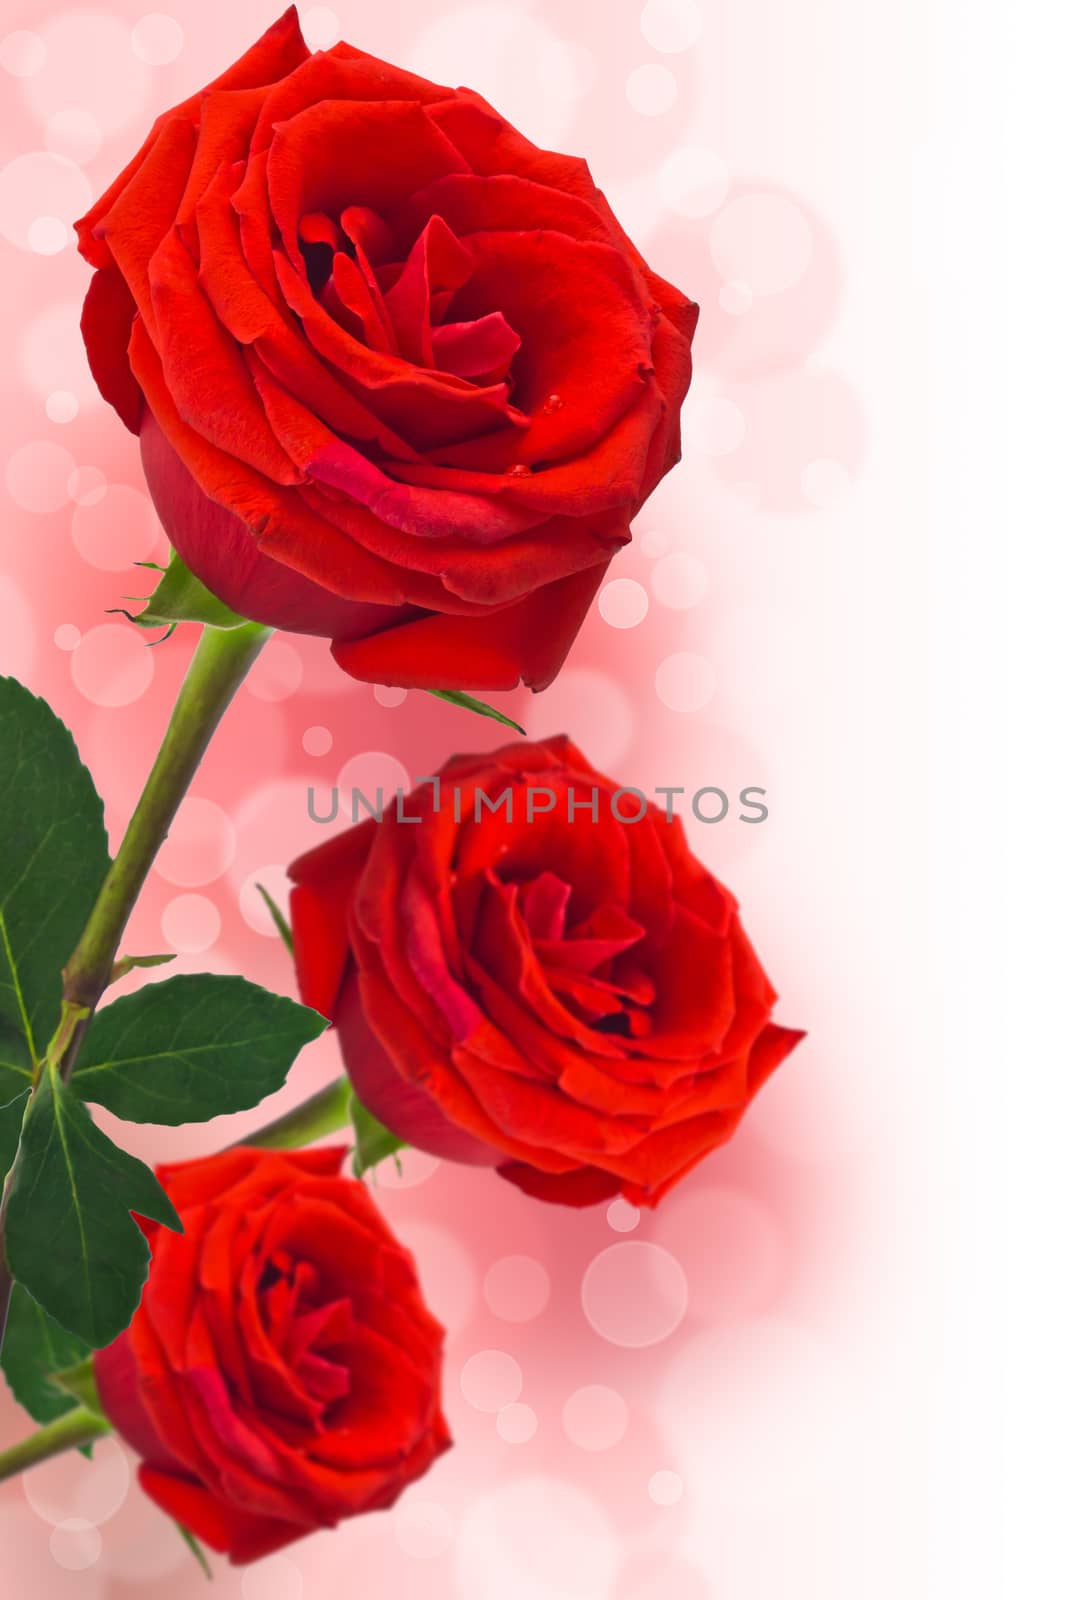 Three red roses on a pink bokeh background